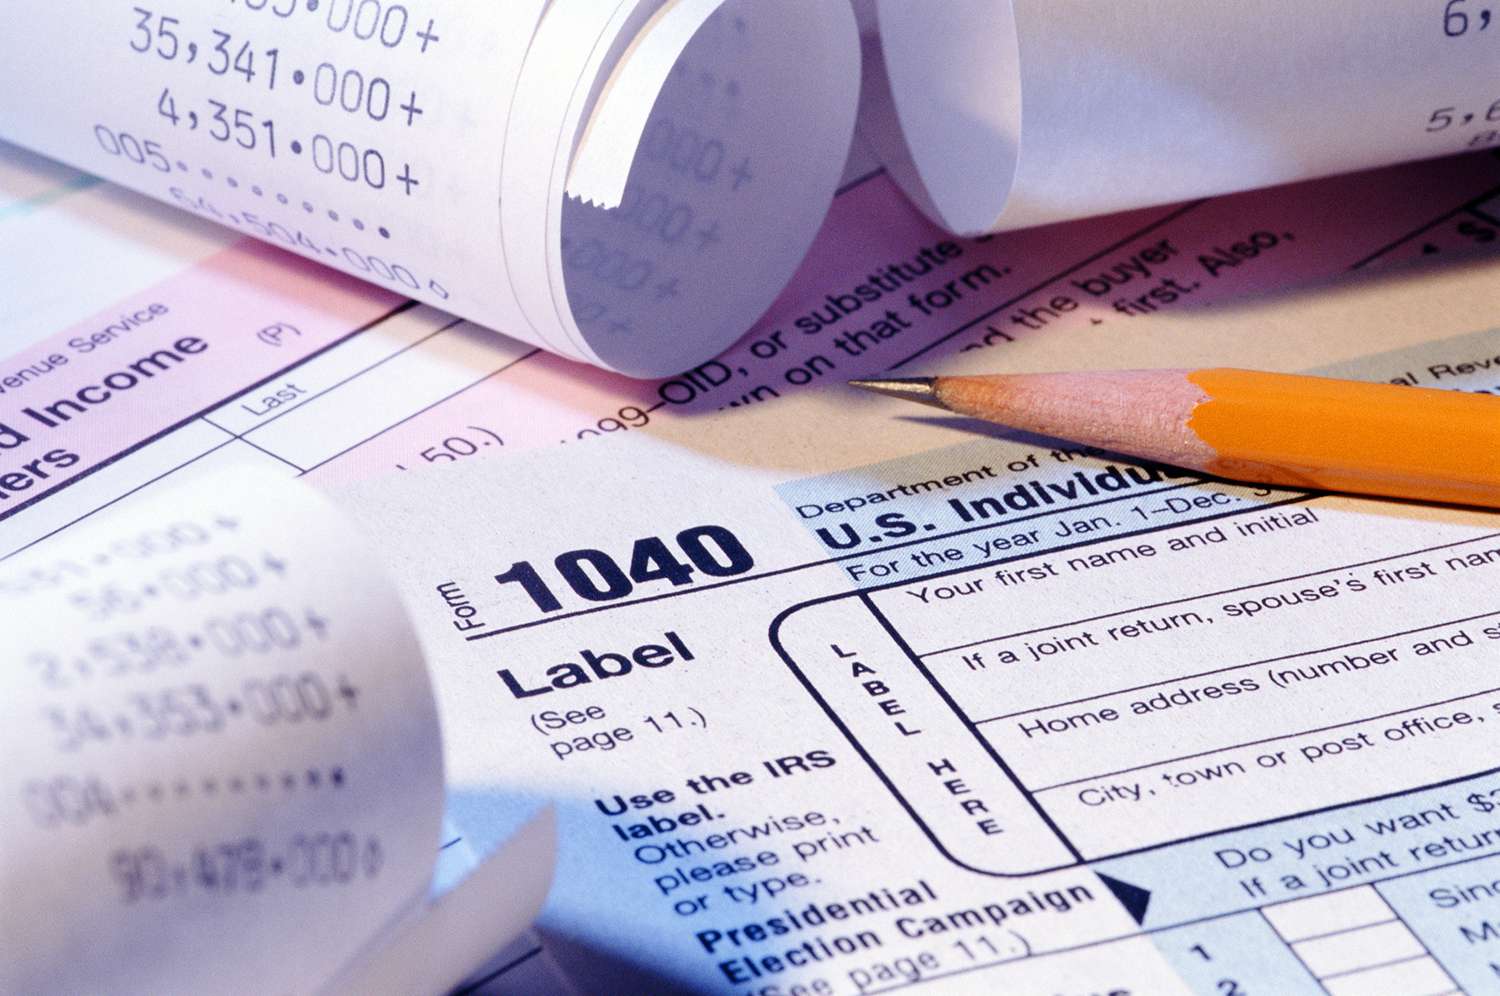 Tax Forms, Pencil and Receipts